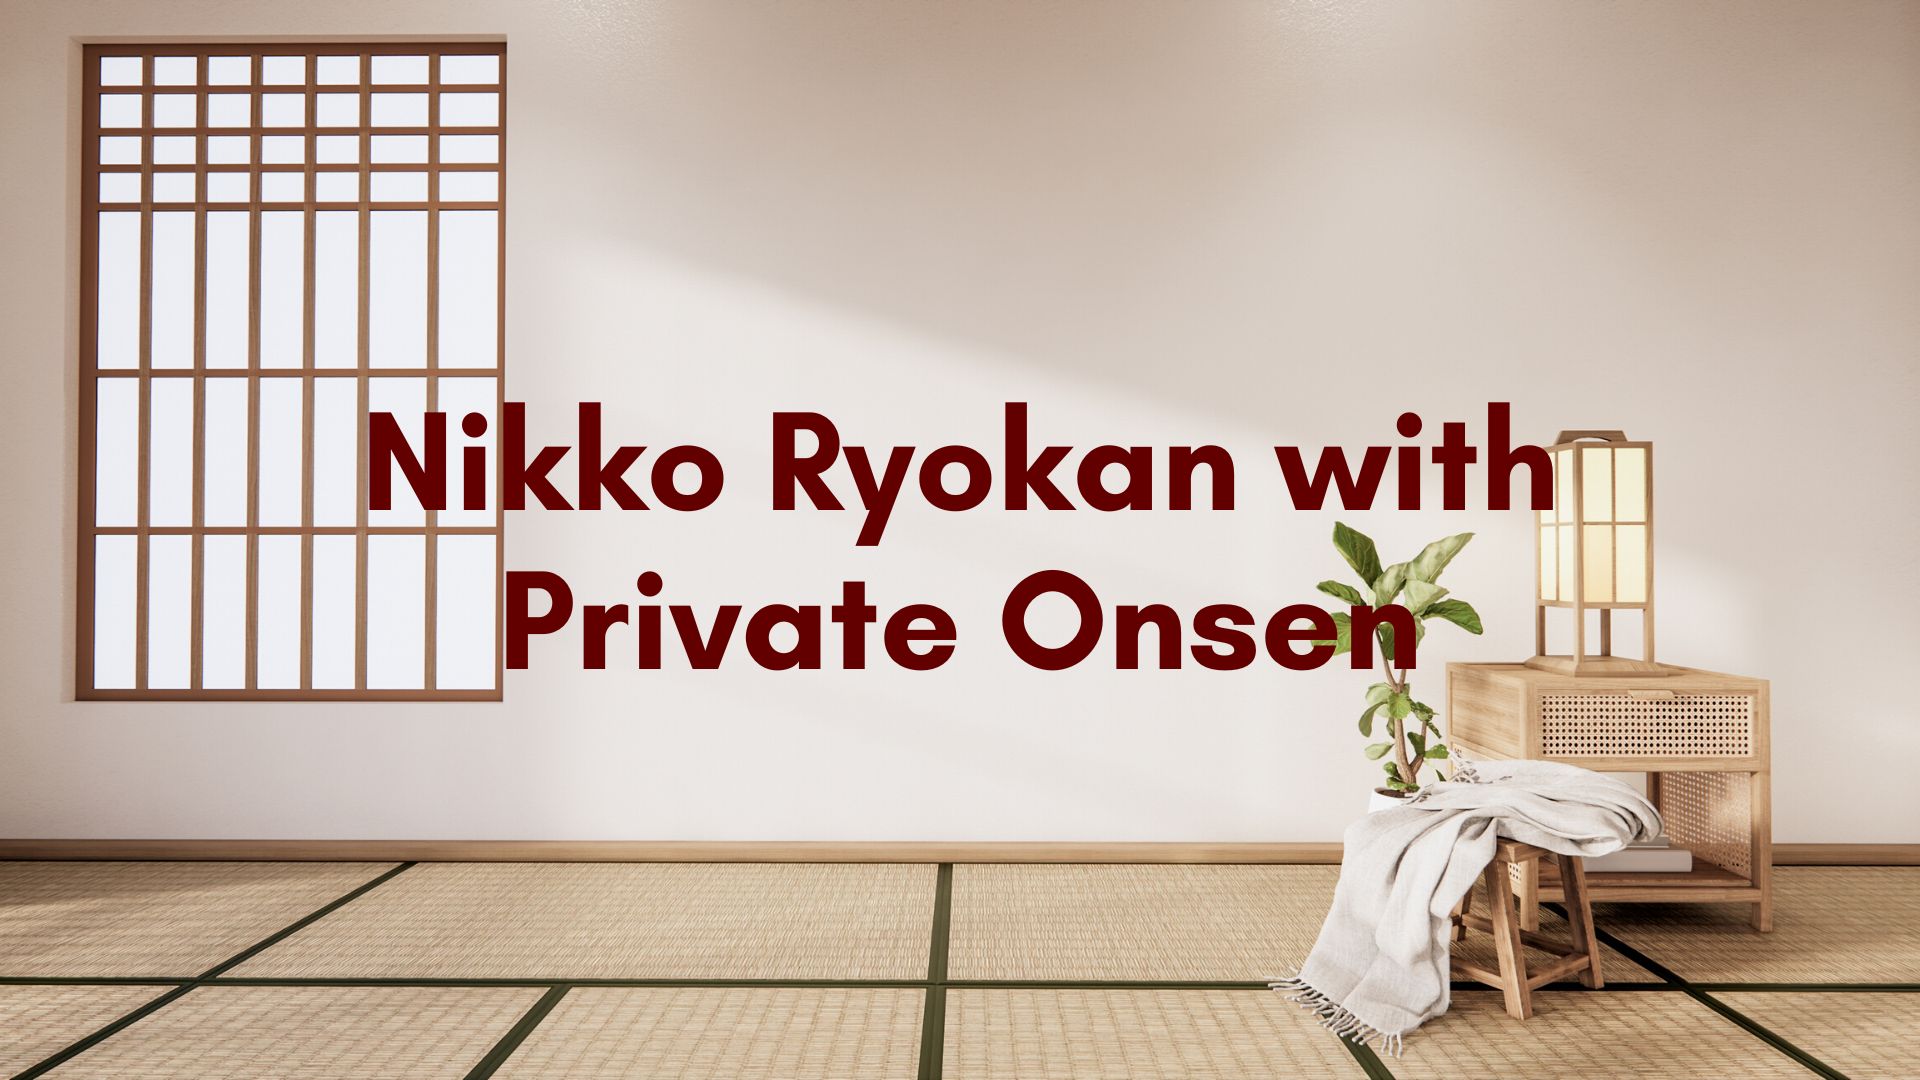 Nikko ryokan with private onsen, onsen in Nikko, best Nikko ryokan with onsen, Nikko accommodation with private onsen